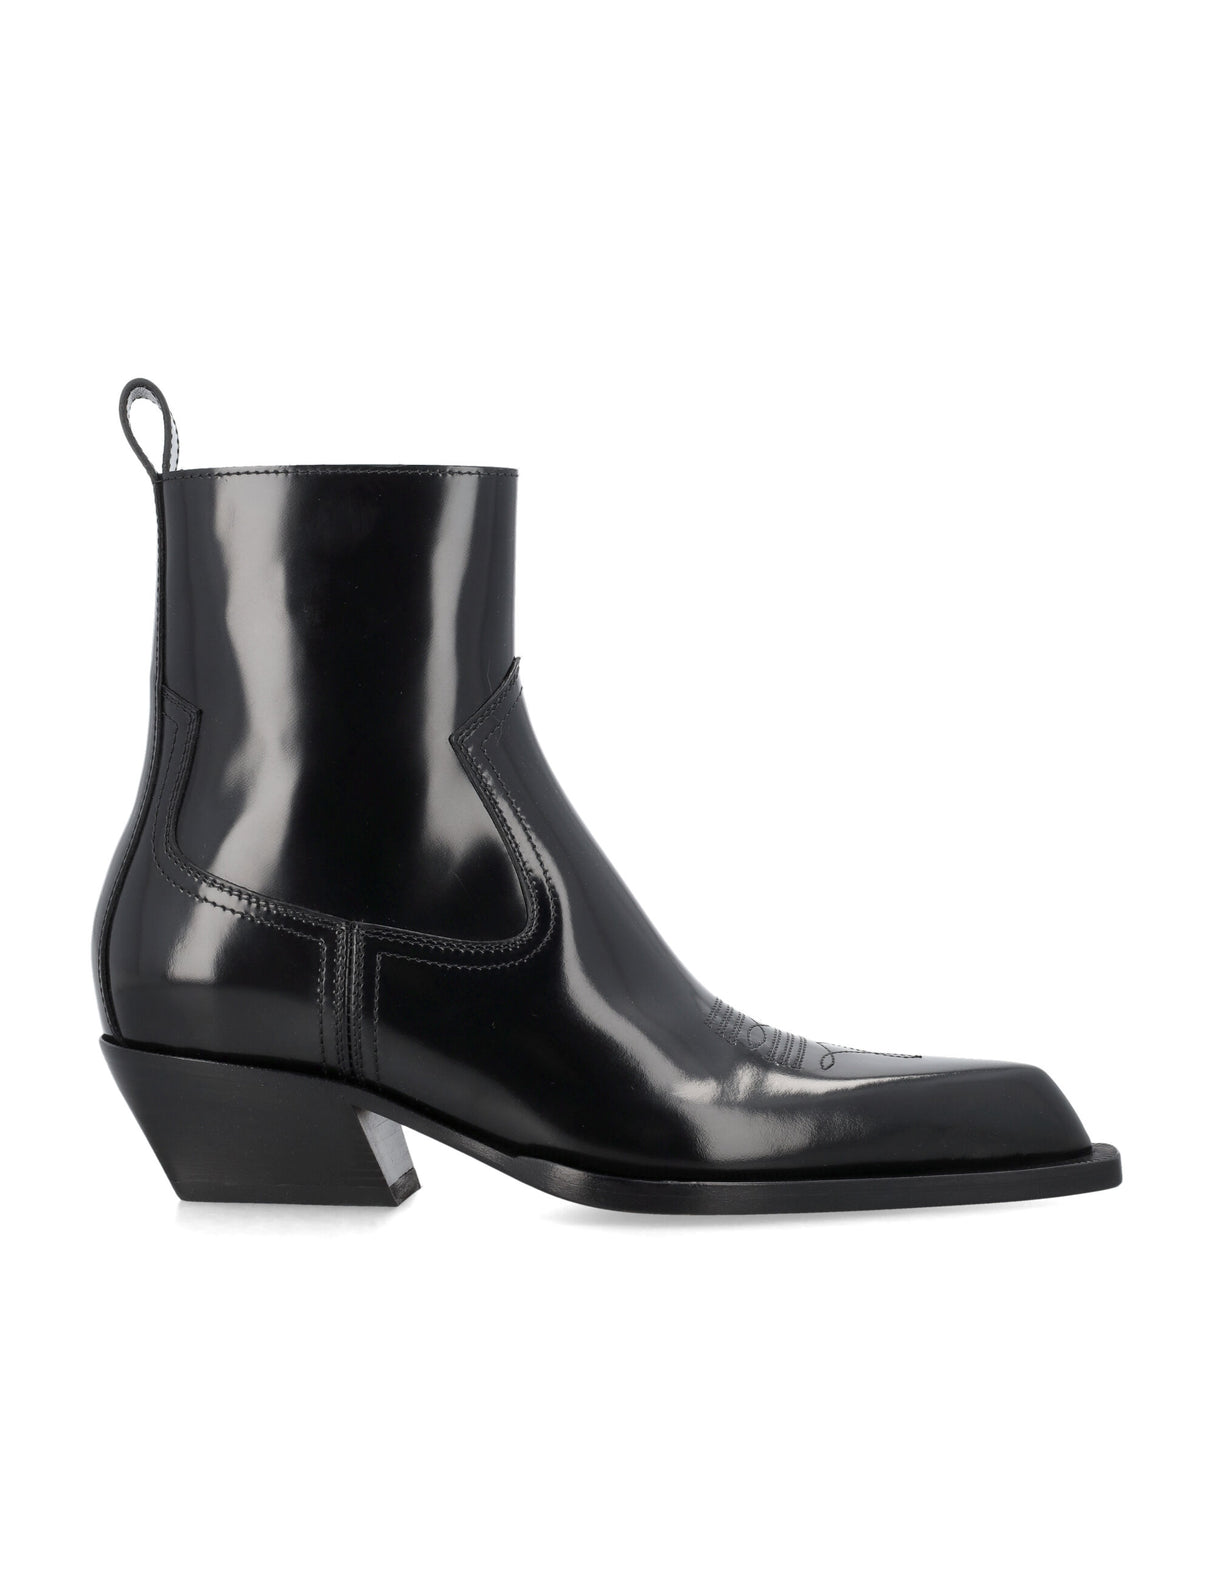 OFF-WHITE Western Blade Ankle Boots for Women in Black